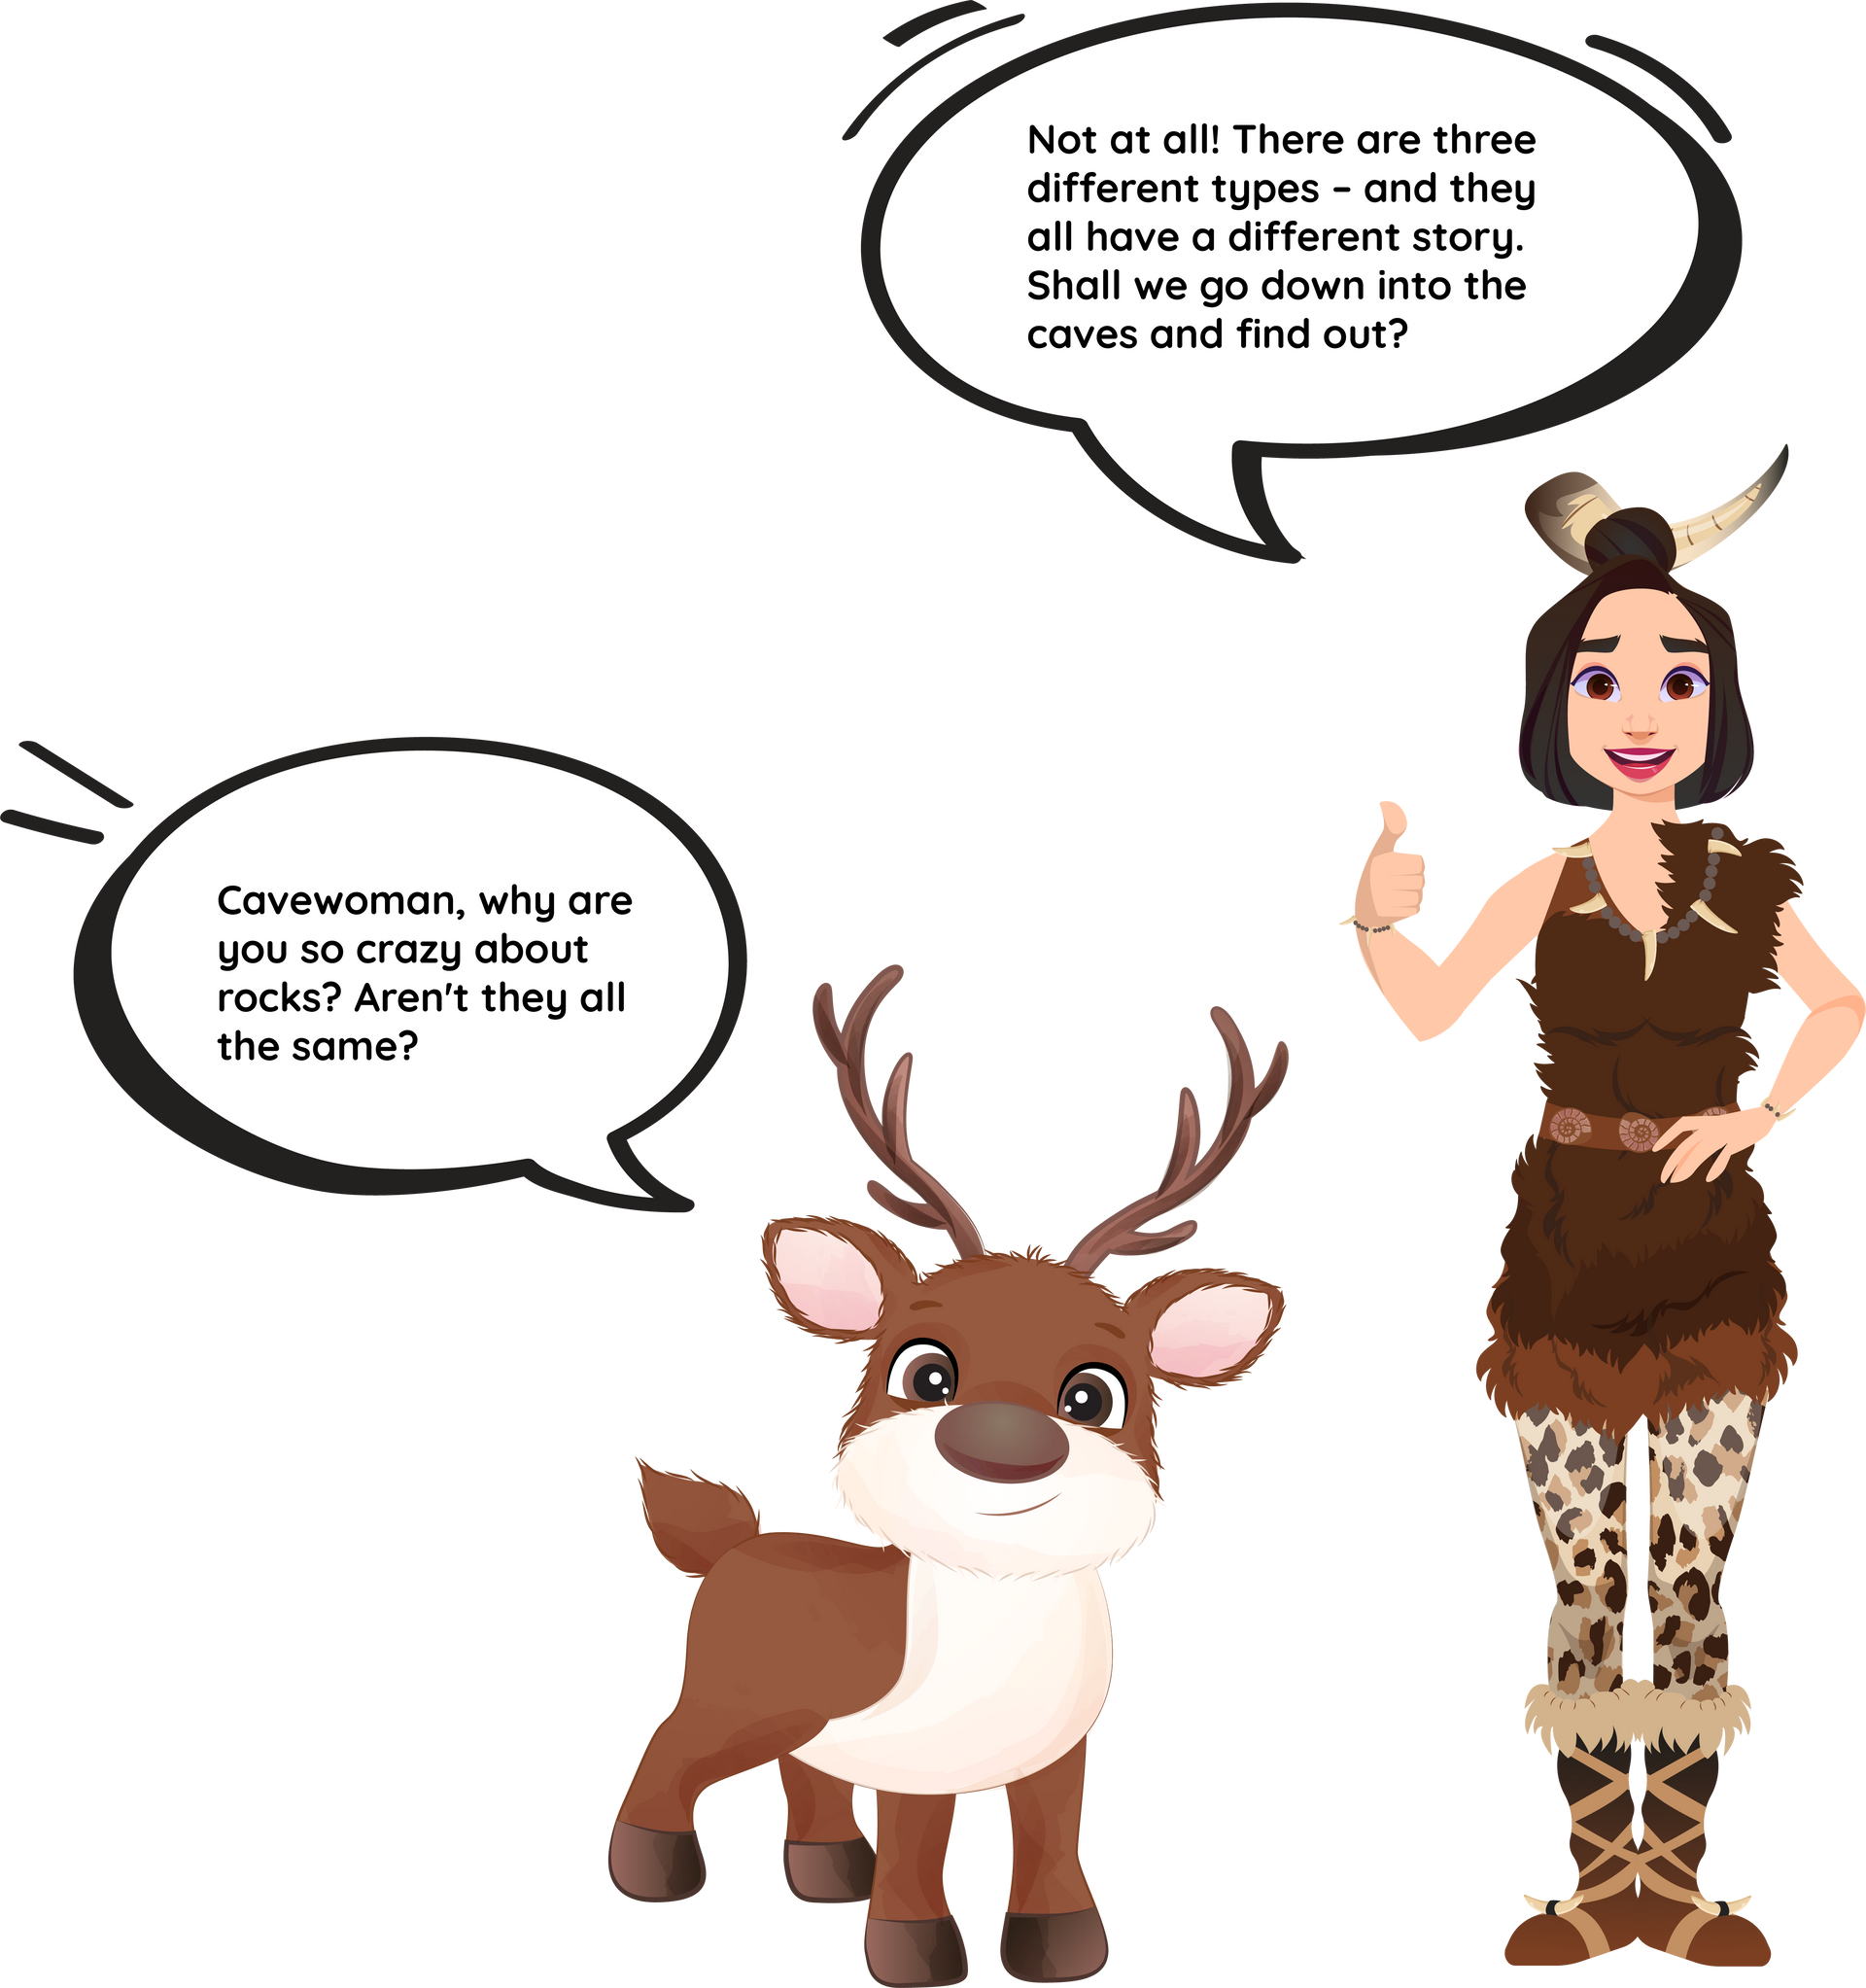 Rowan the reindeer asks cavewoman what her favourite animal is